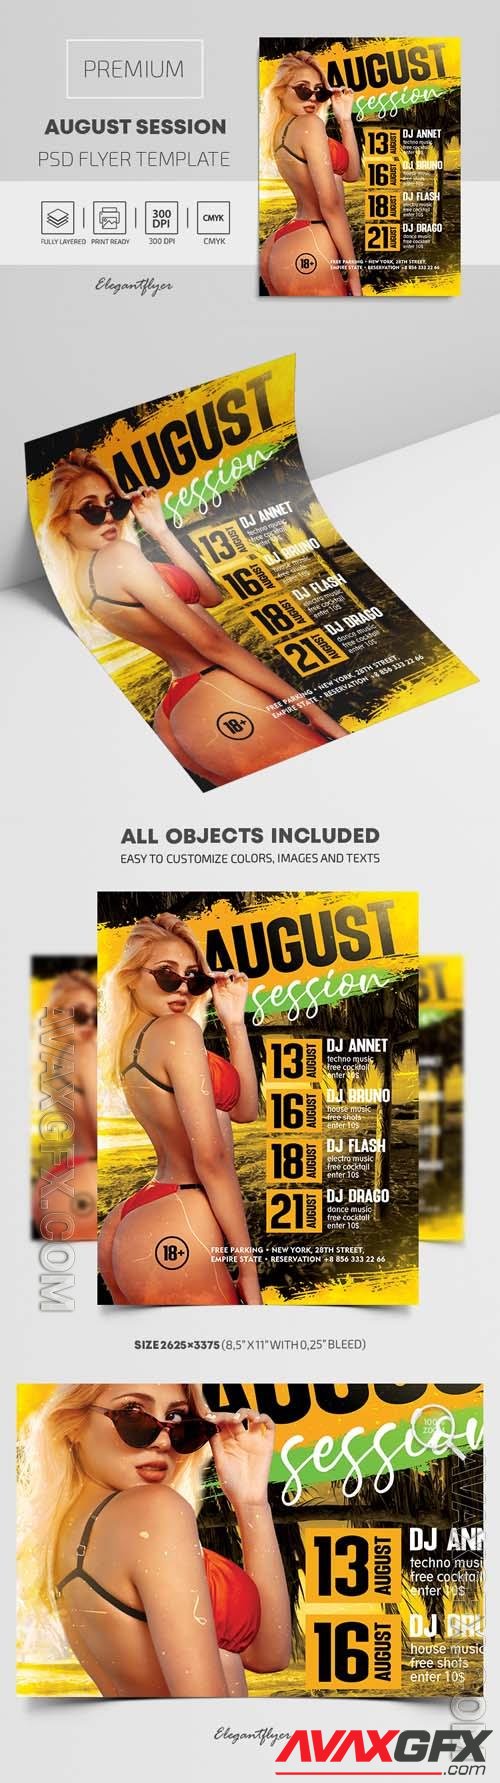 August Session – Premium PSD Flyer Template